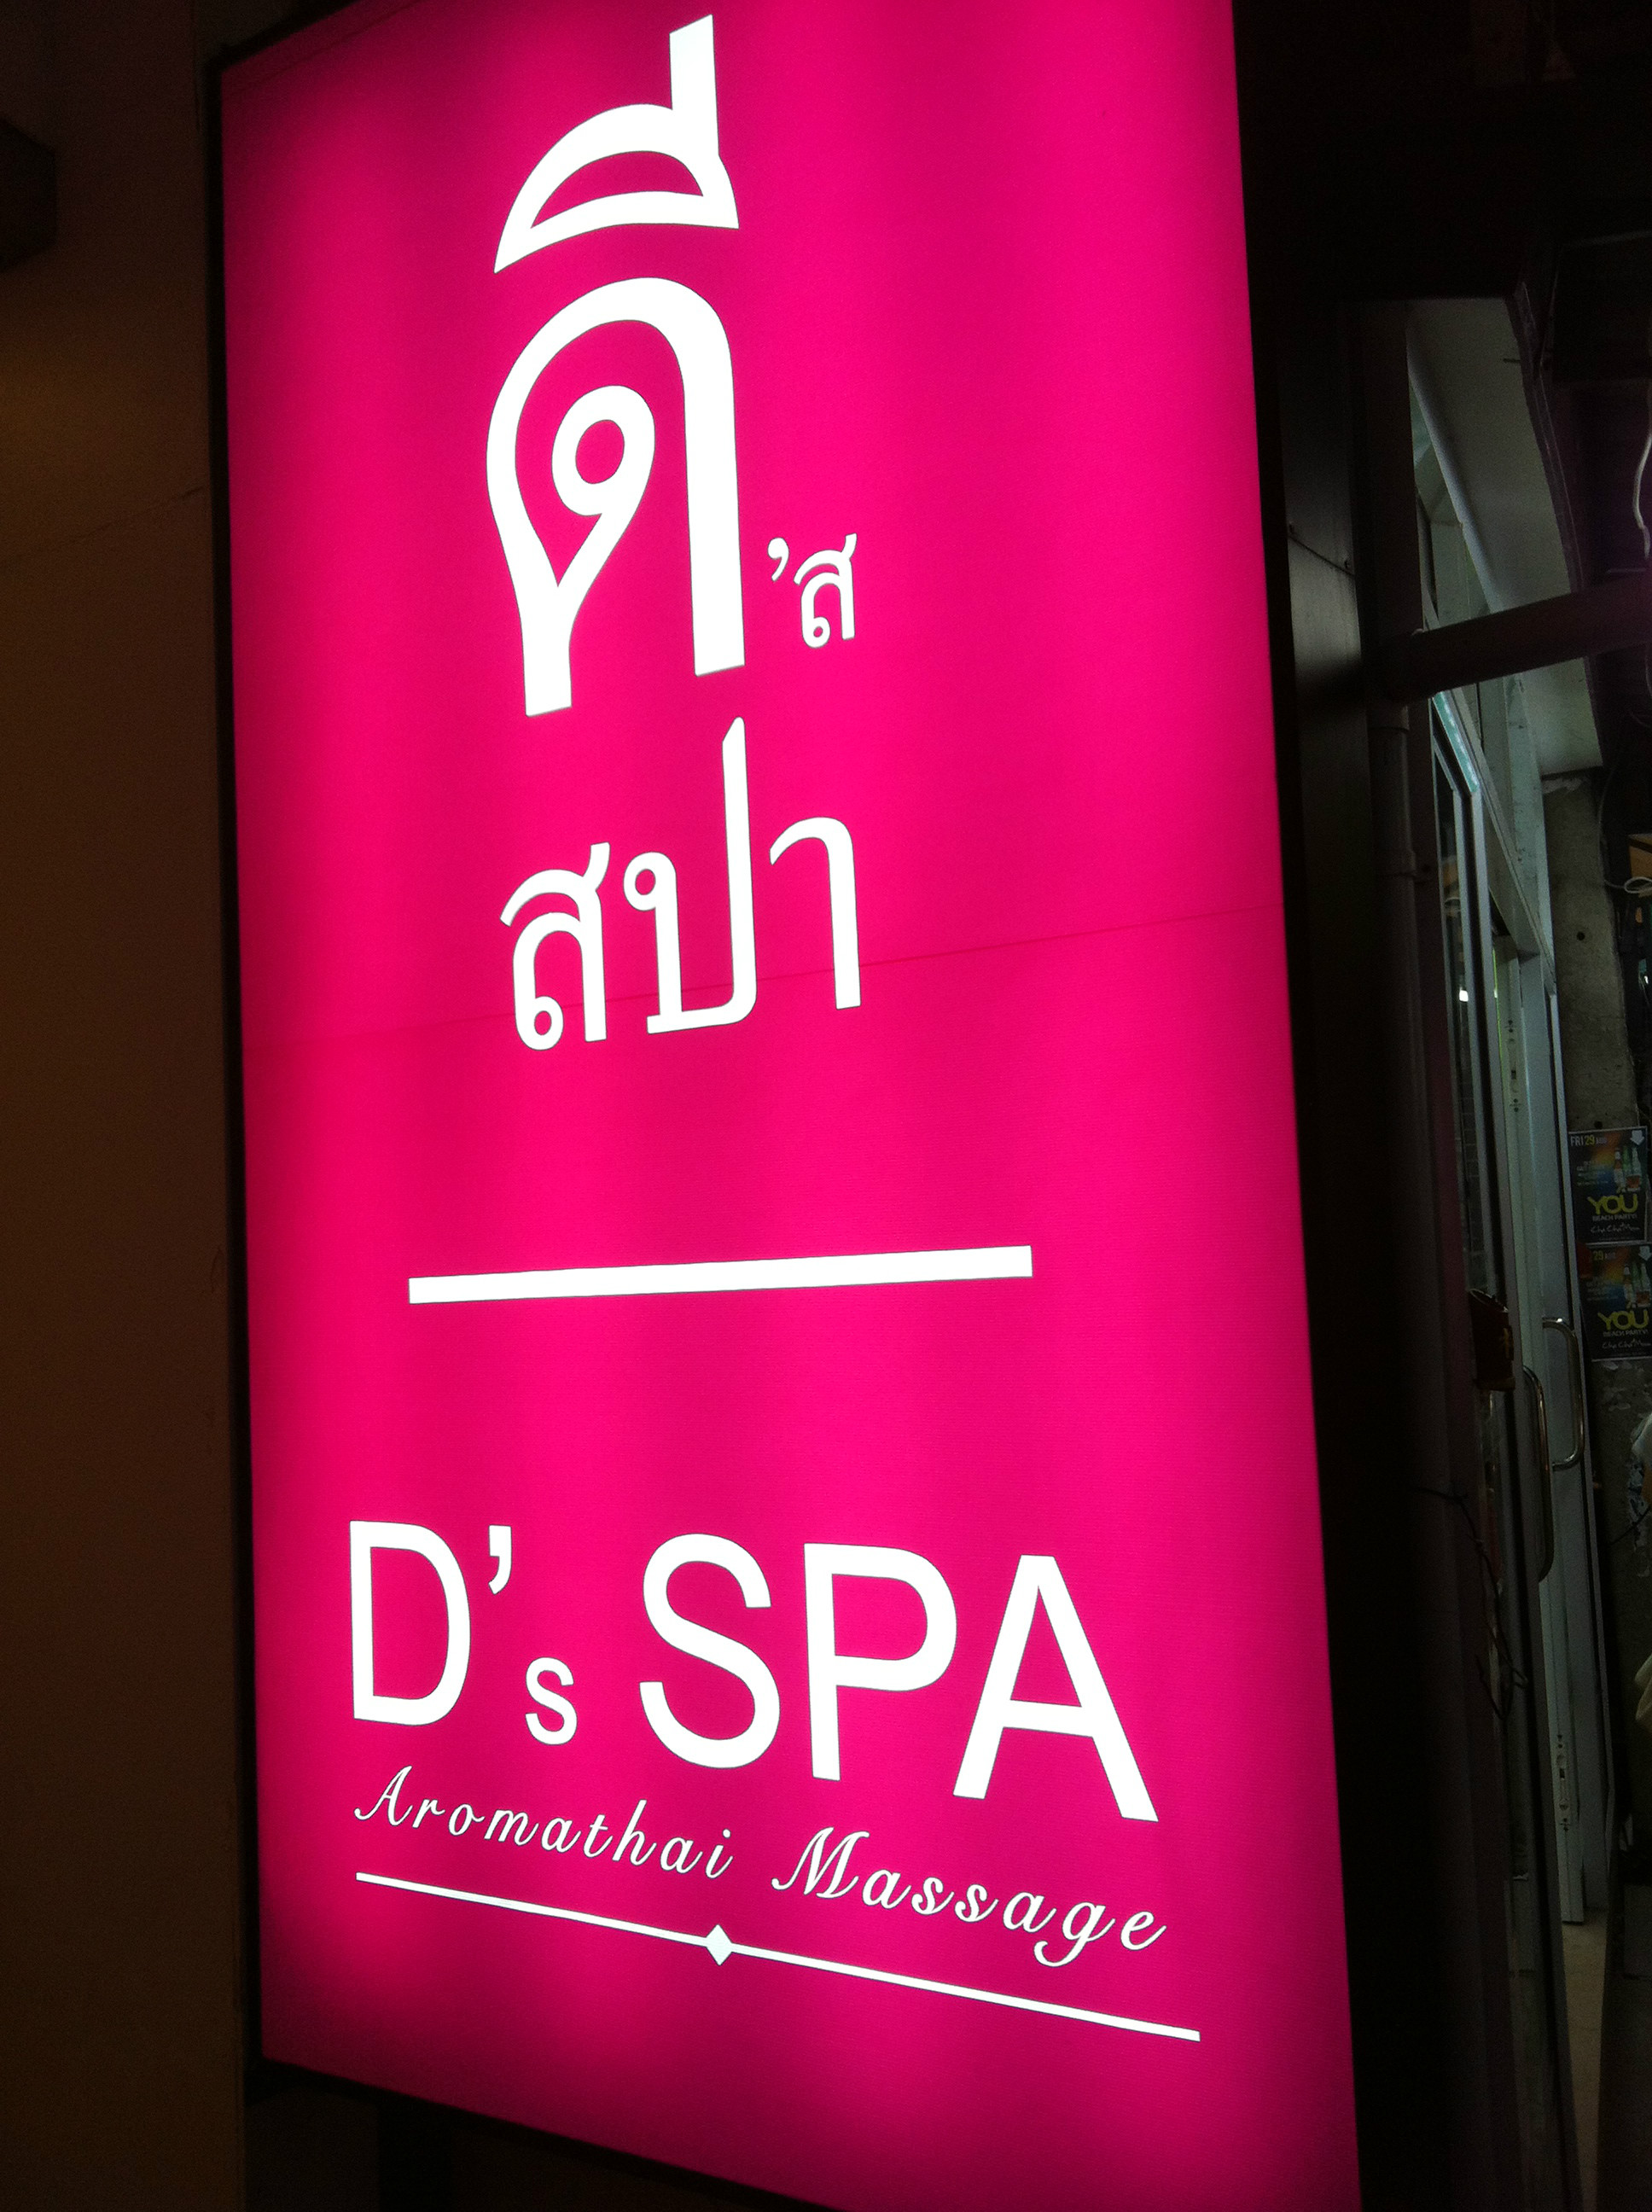 D's SPA